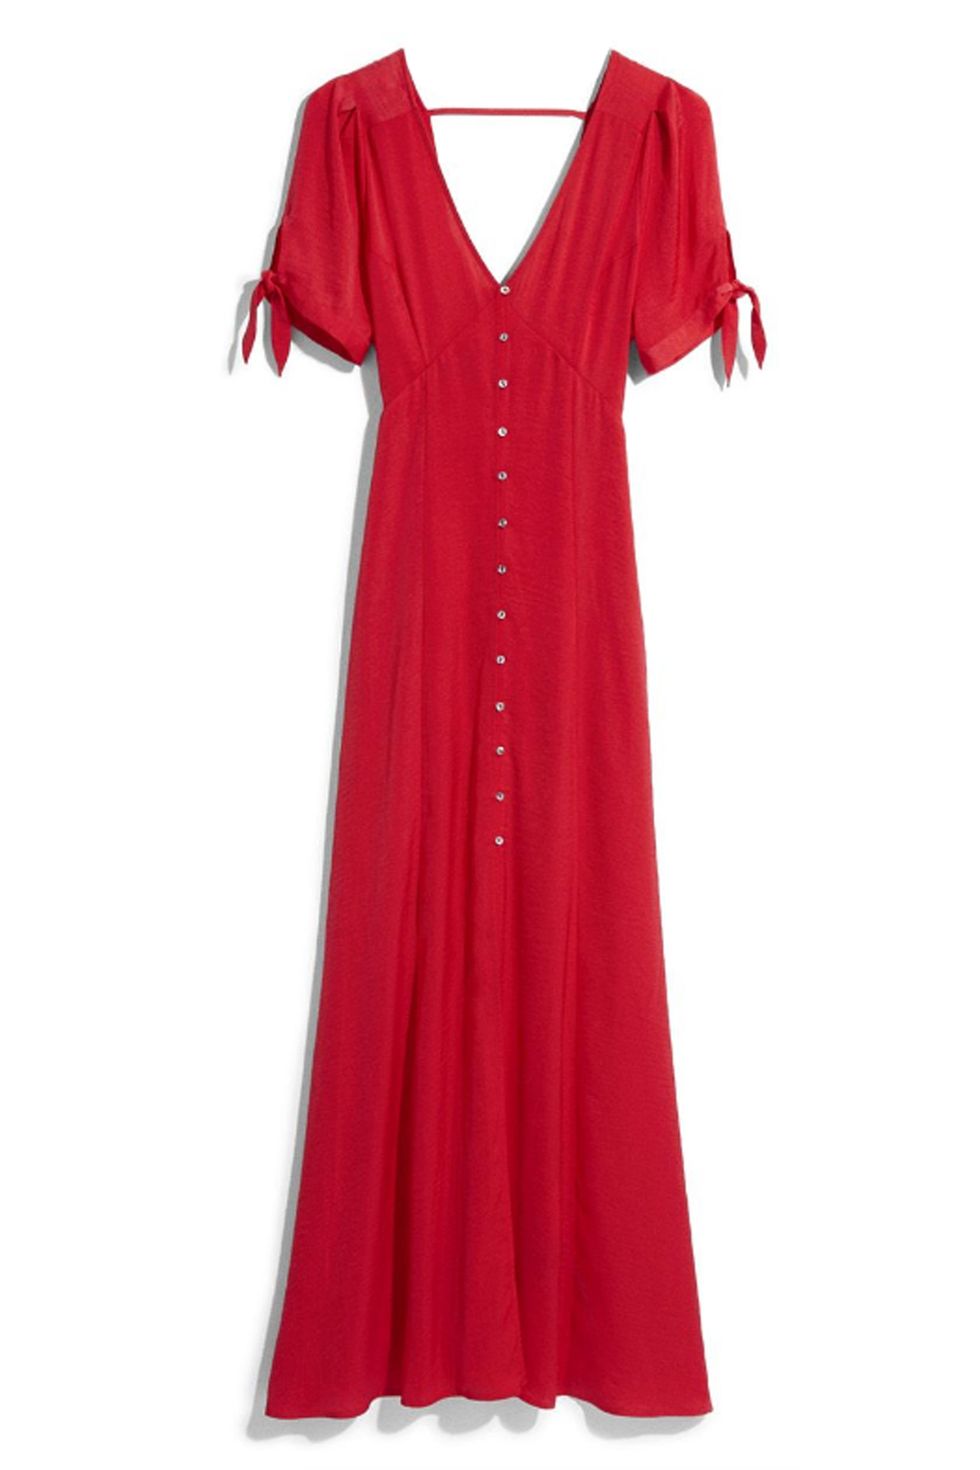 Clothing, Red, Dress, Day dress, Sleeve, Neck, Nightwear, Textile, Cocktail dress, Nightgown, 